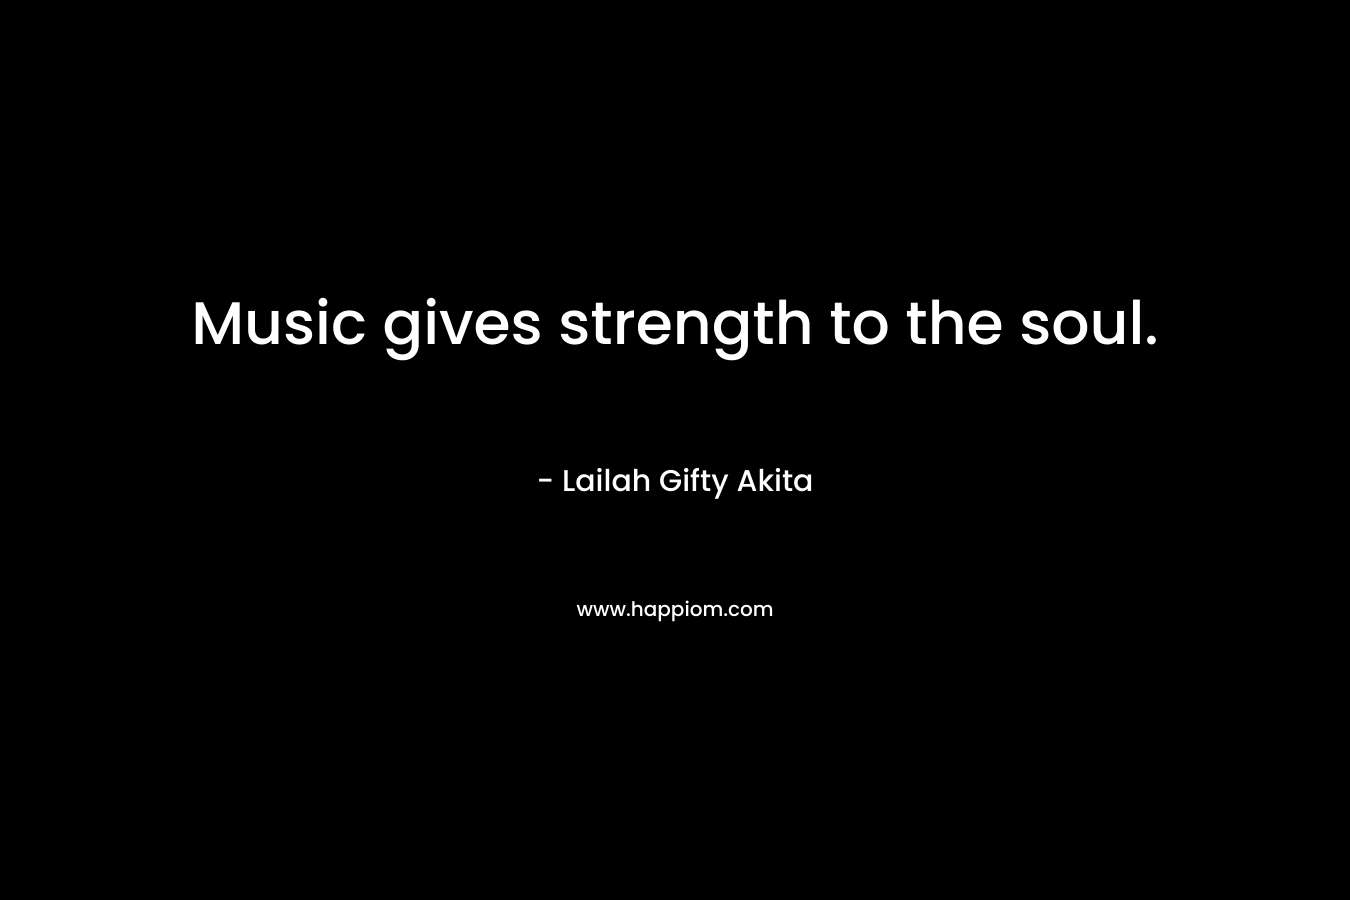 Music gives strength to the soul.